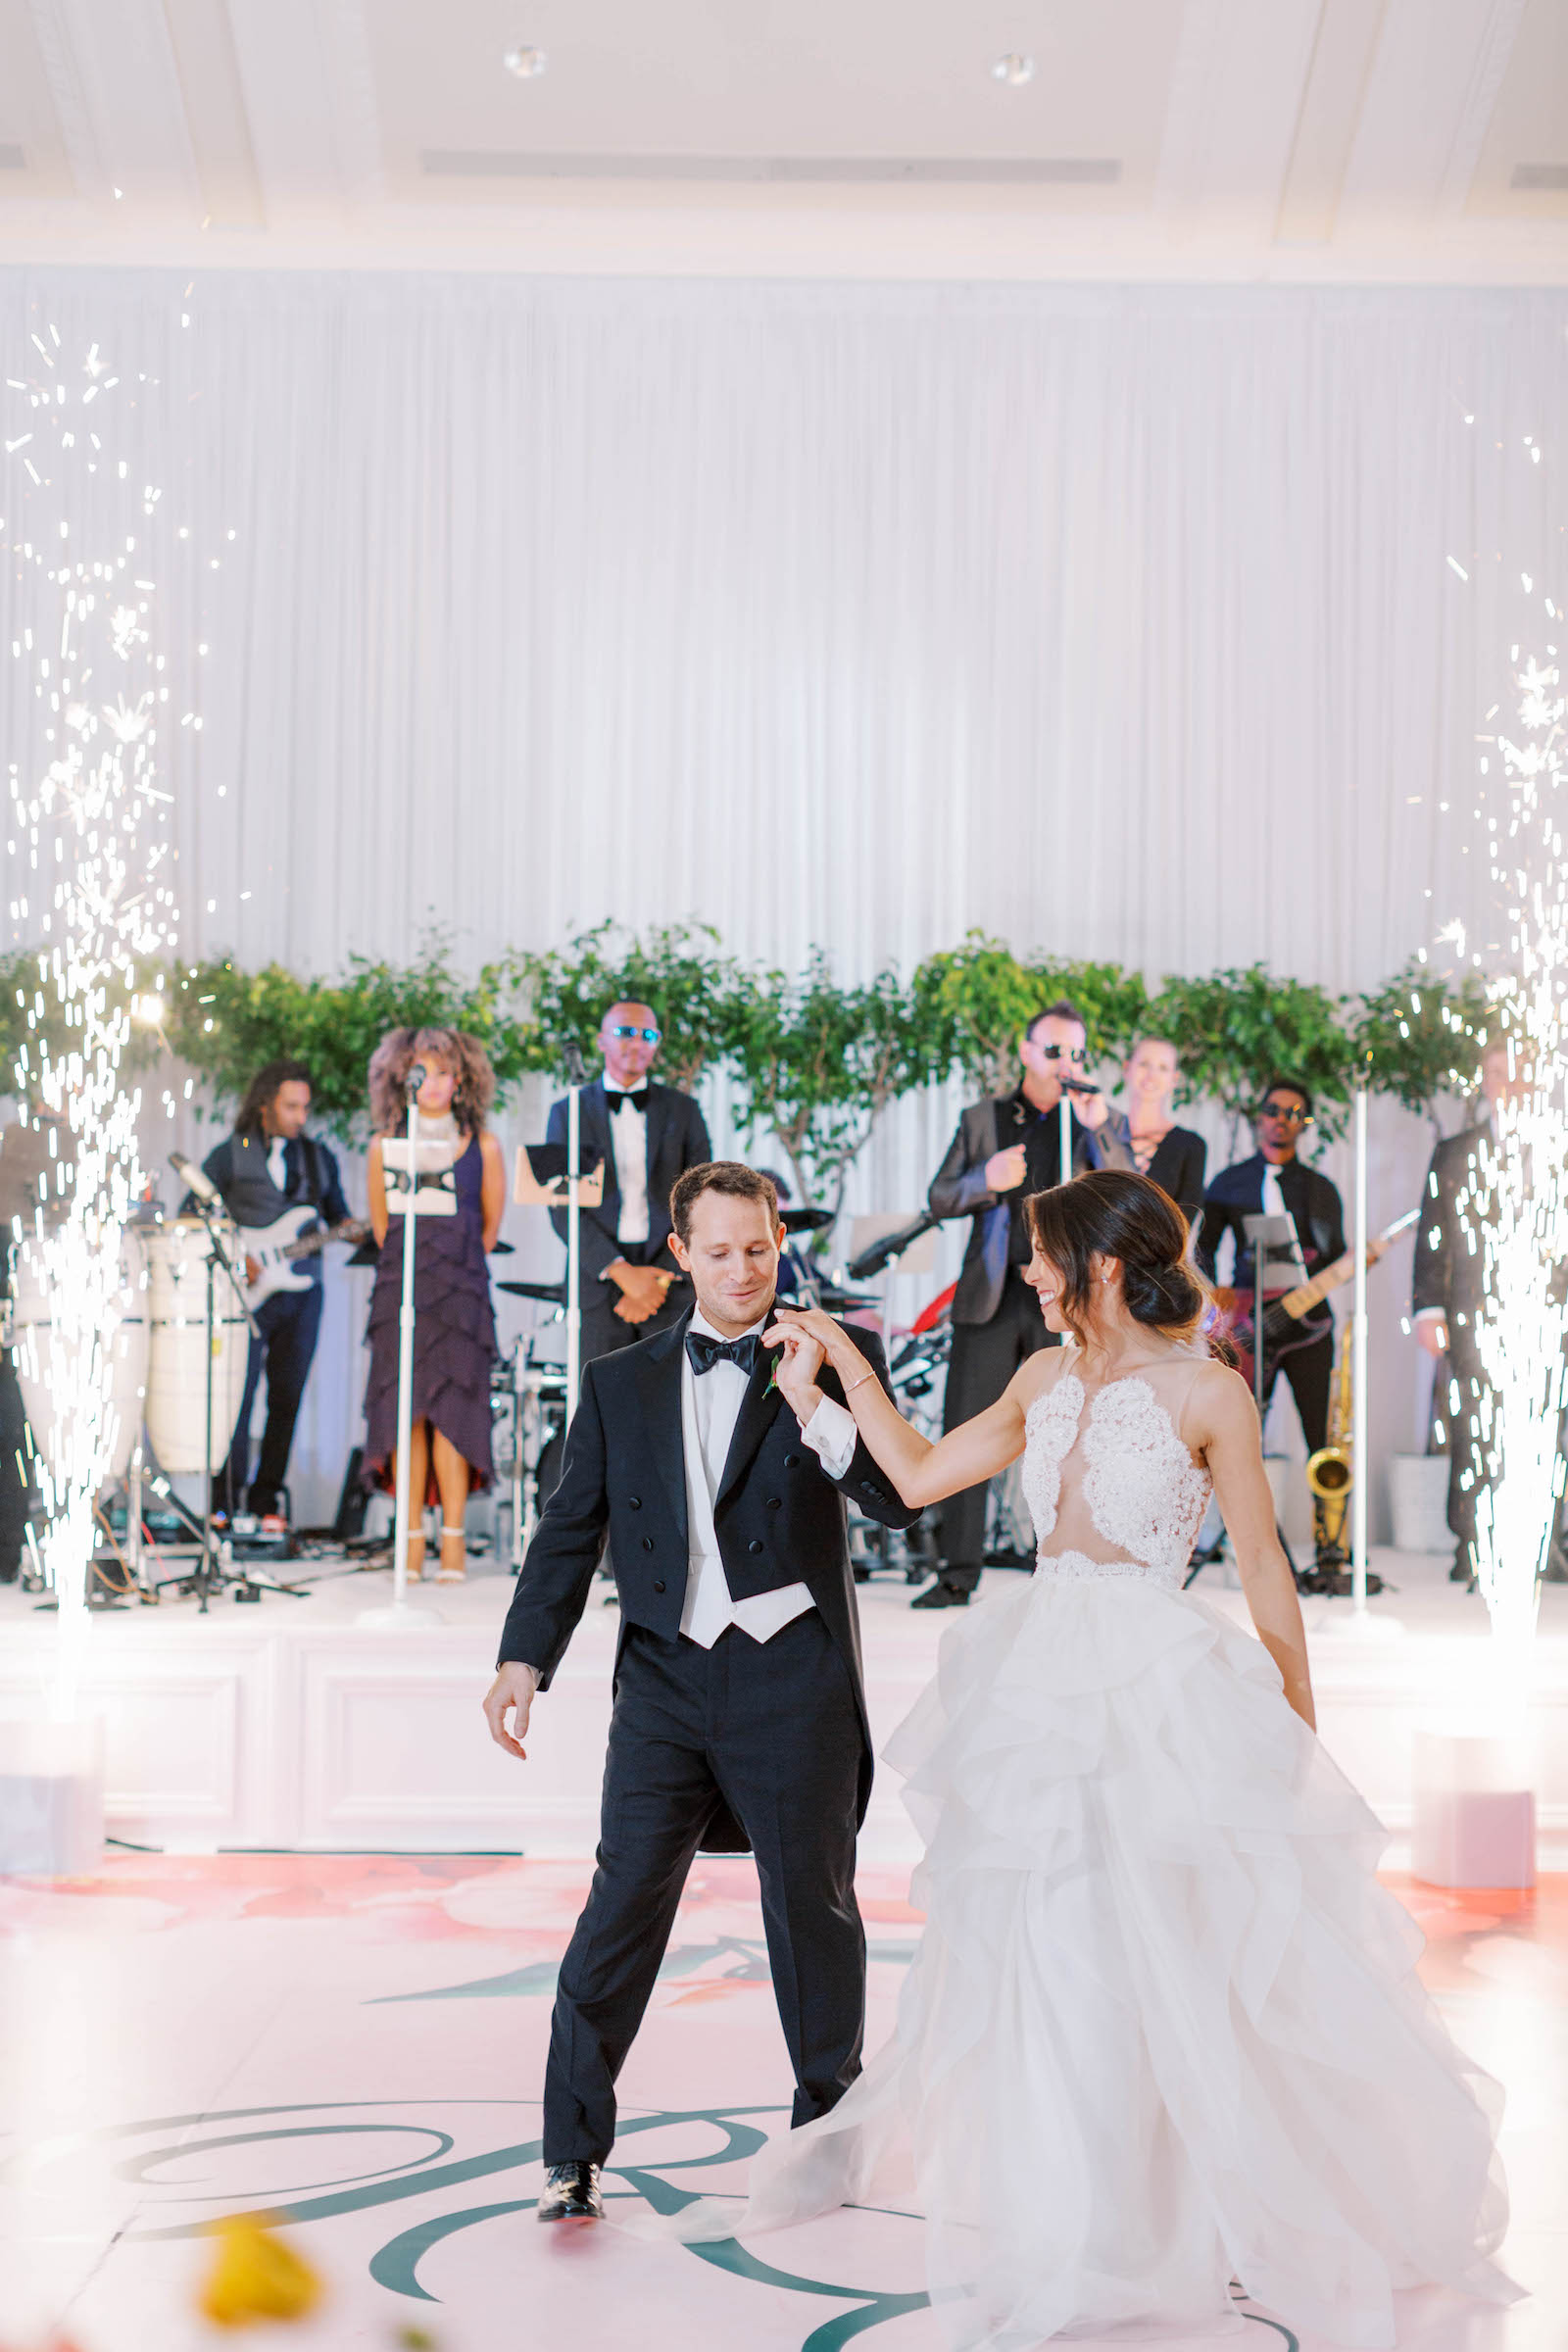 Bride and Groom First Dance with Wedding Cold Sparkler Dance | Spark Wedding Events